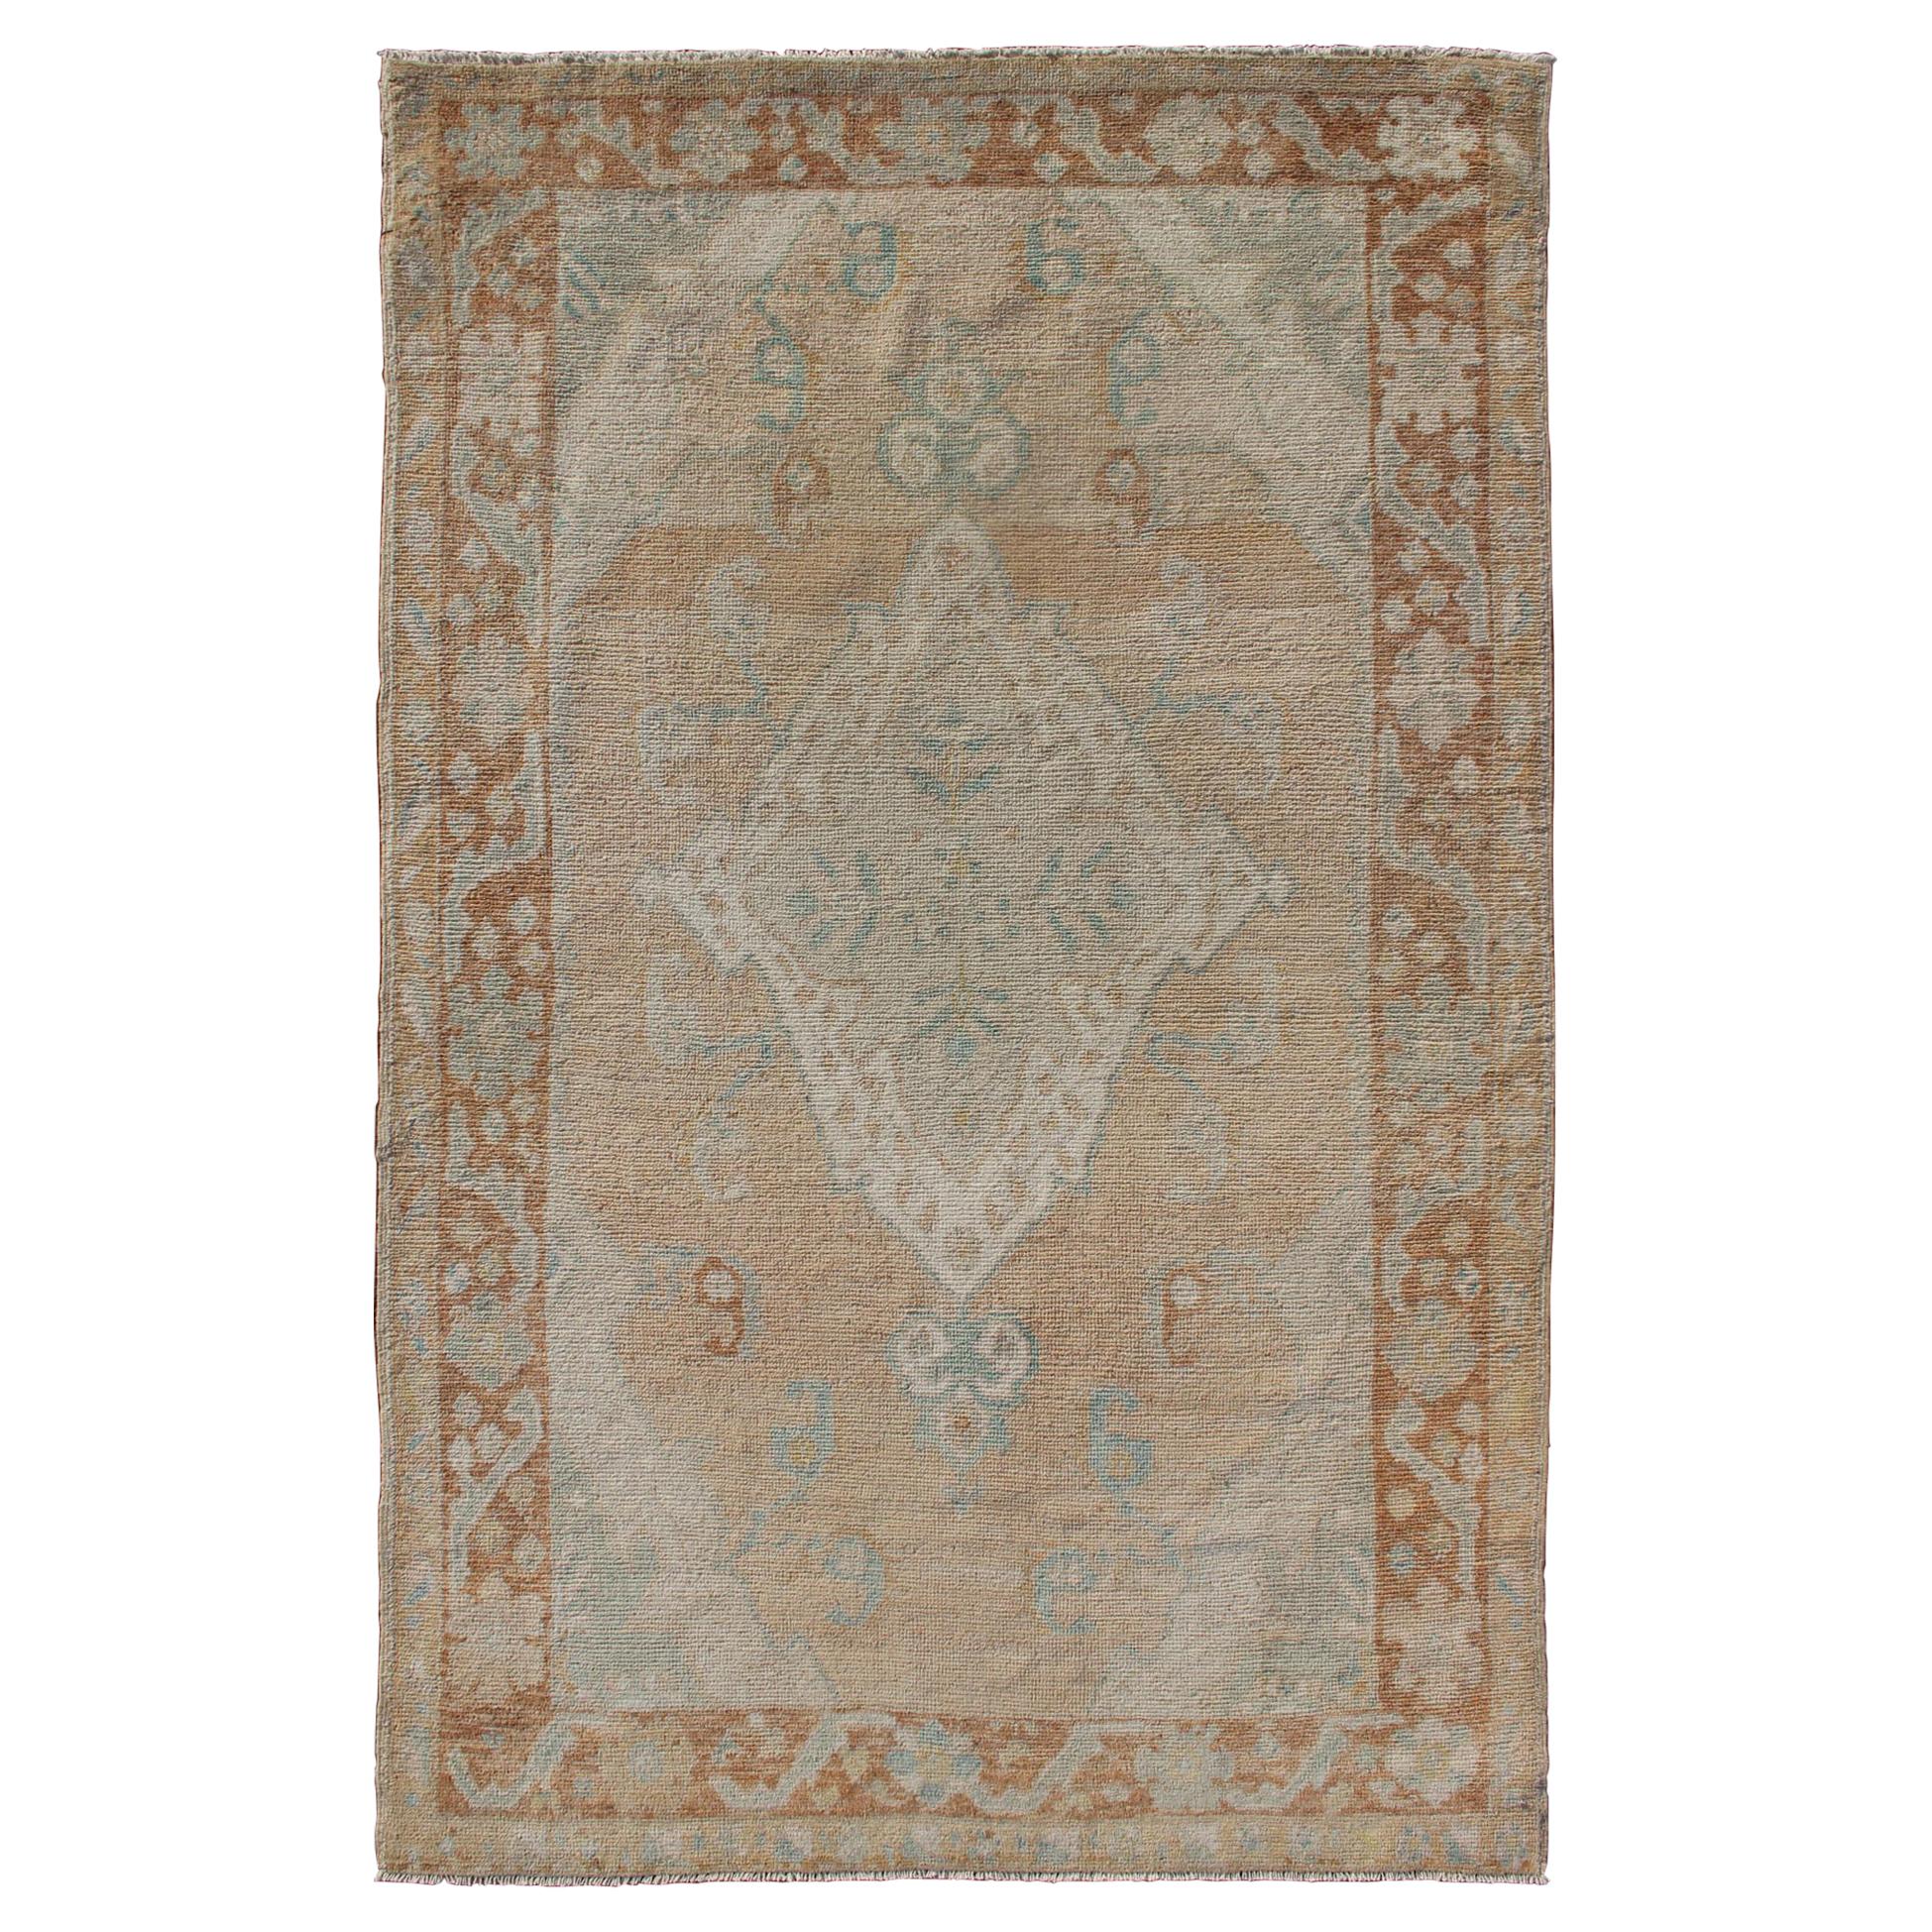 Muted Colored Turkish Oushak Rug is Subdued Medallion Design